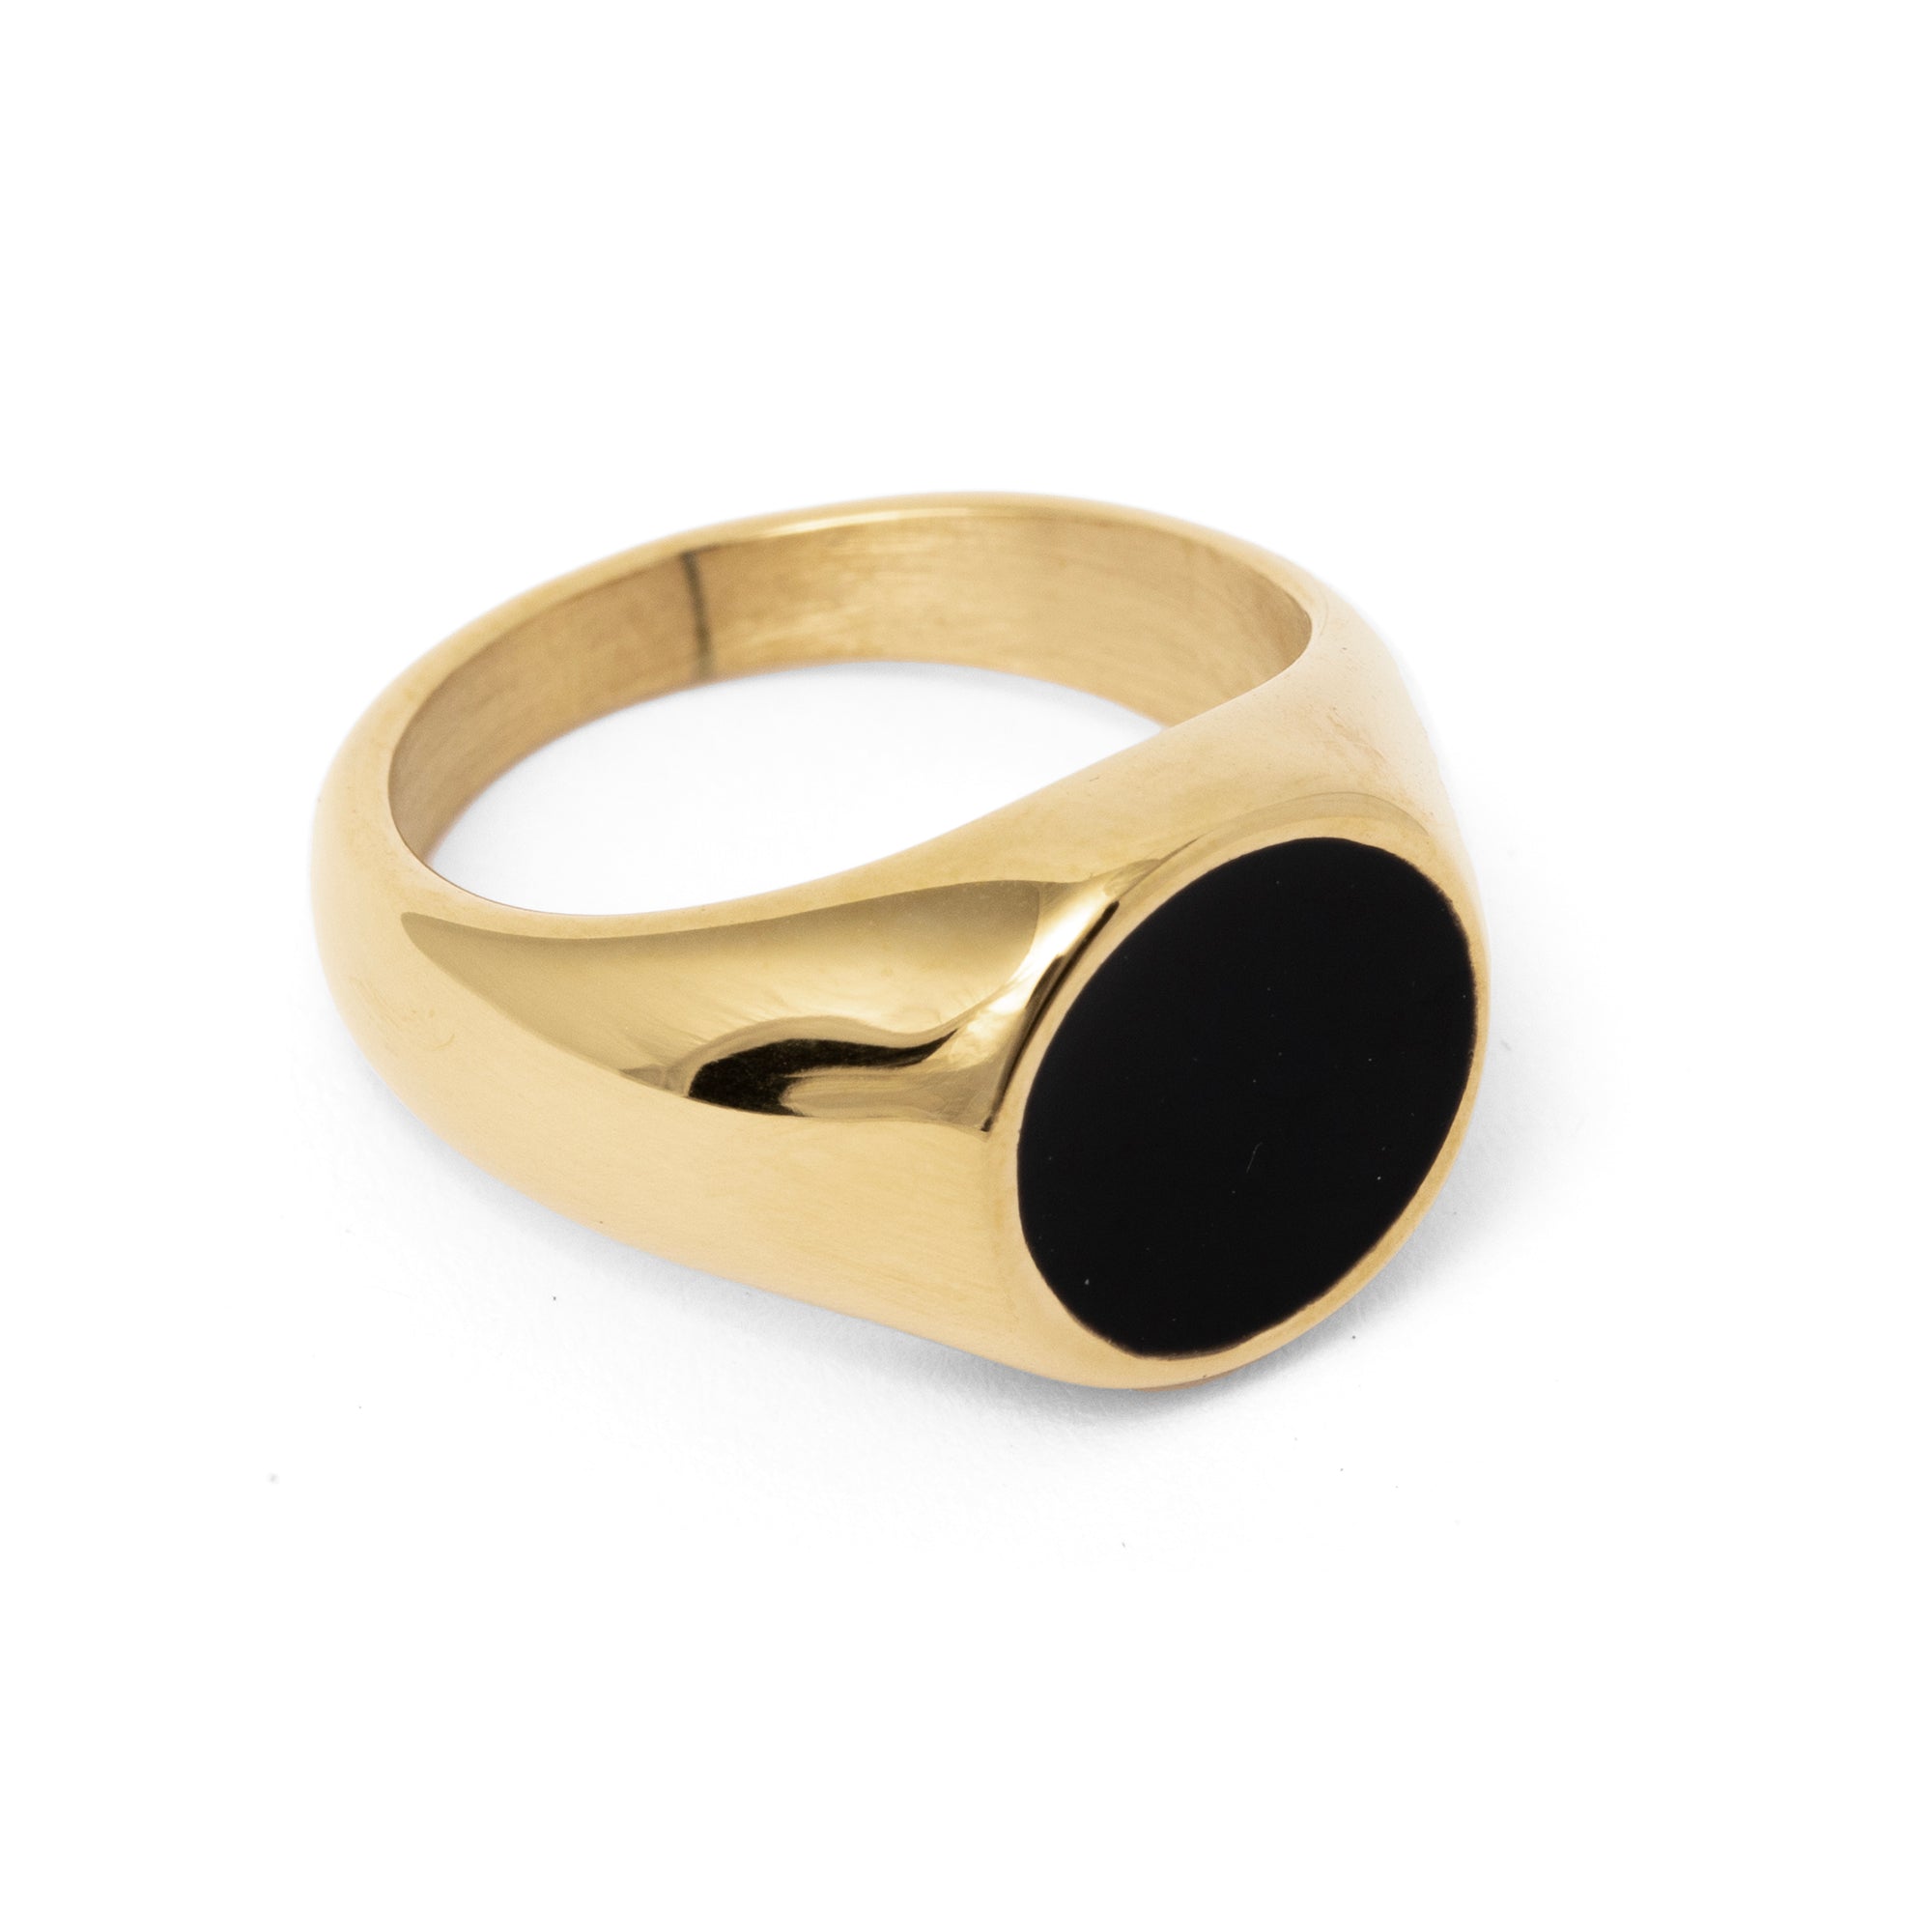 The Ink Signet RingBy Rae Jewellery